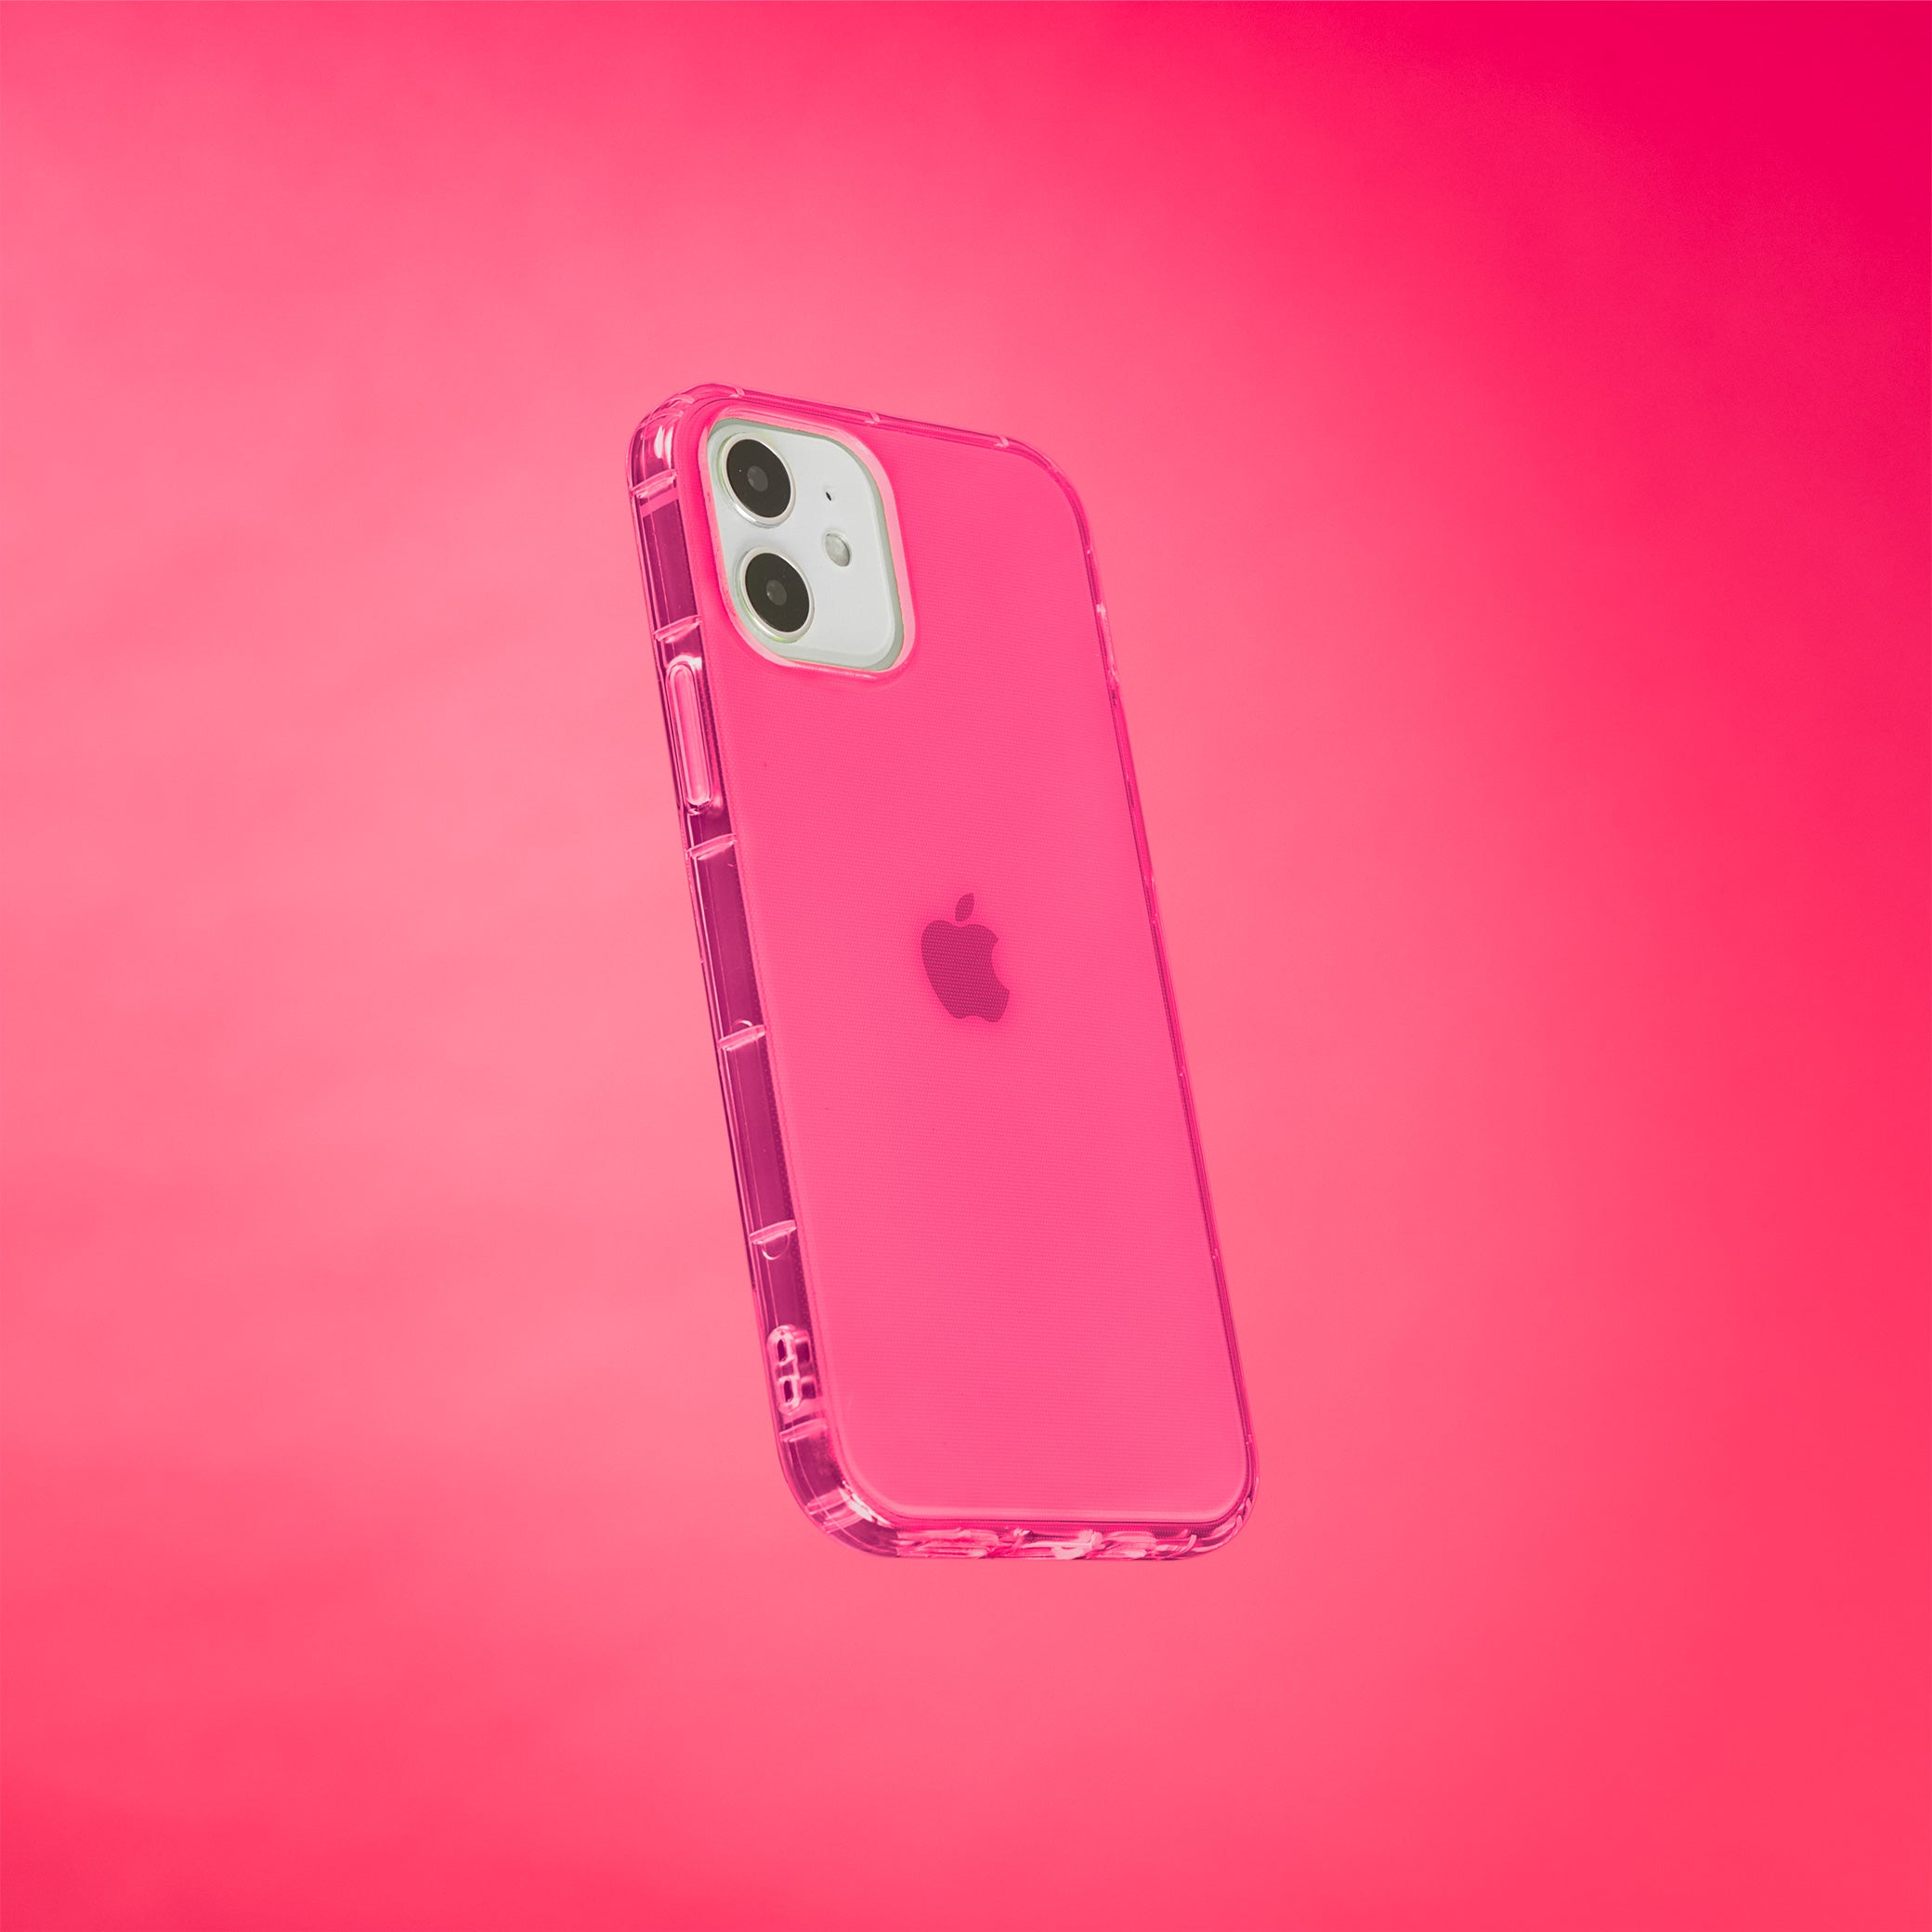 Highlighter Case for iPhone 12 & iPhone 12 Pro - Eye-Catching Hot